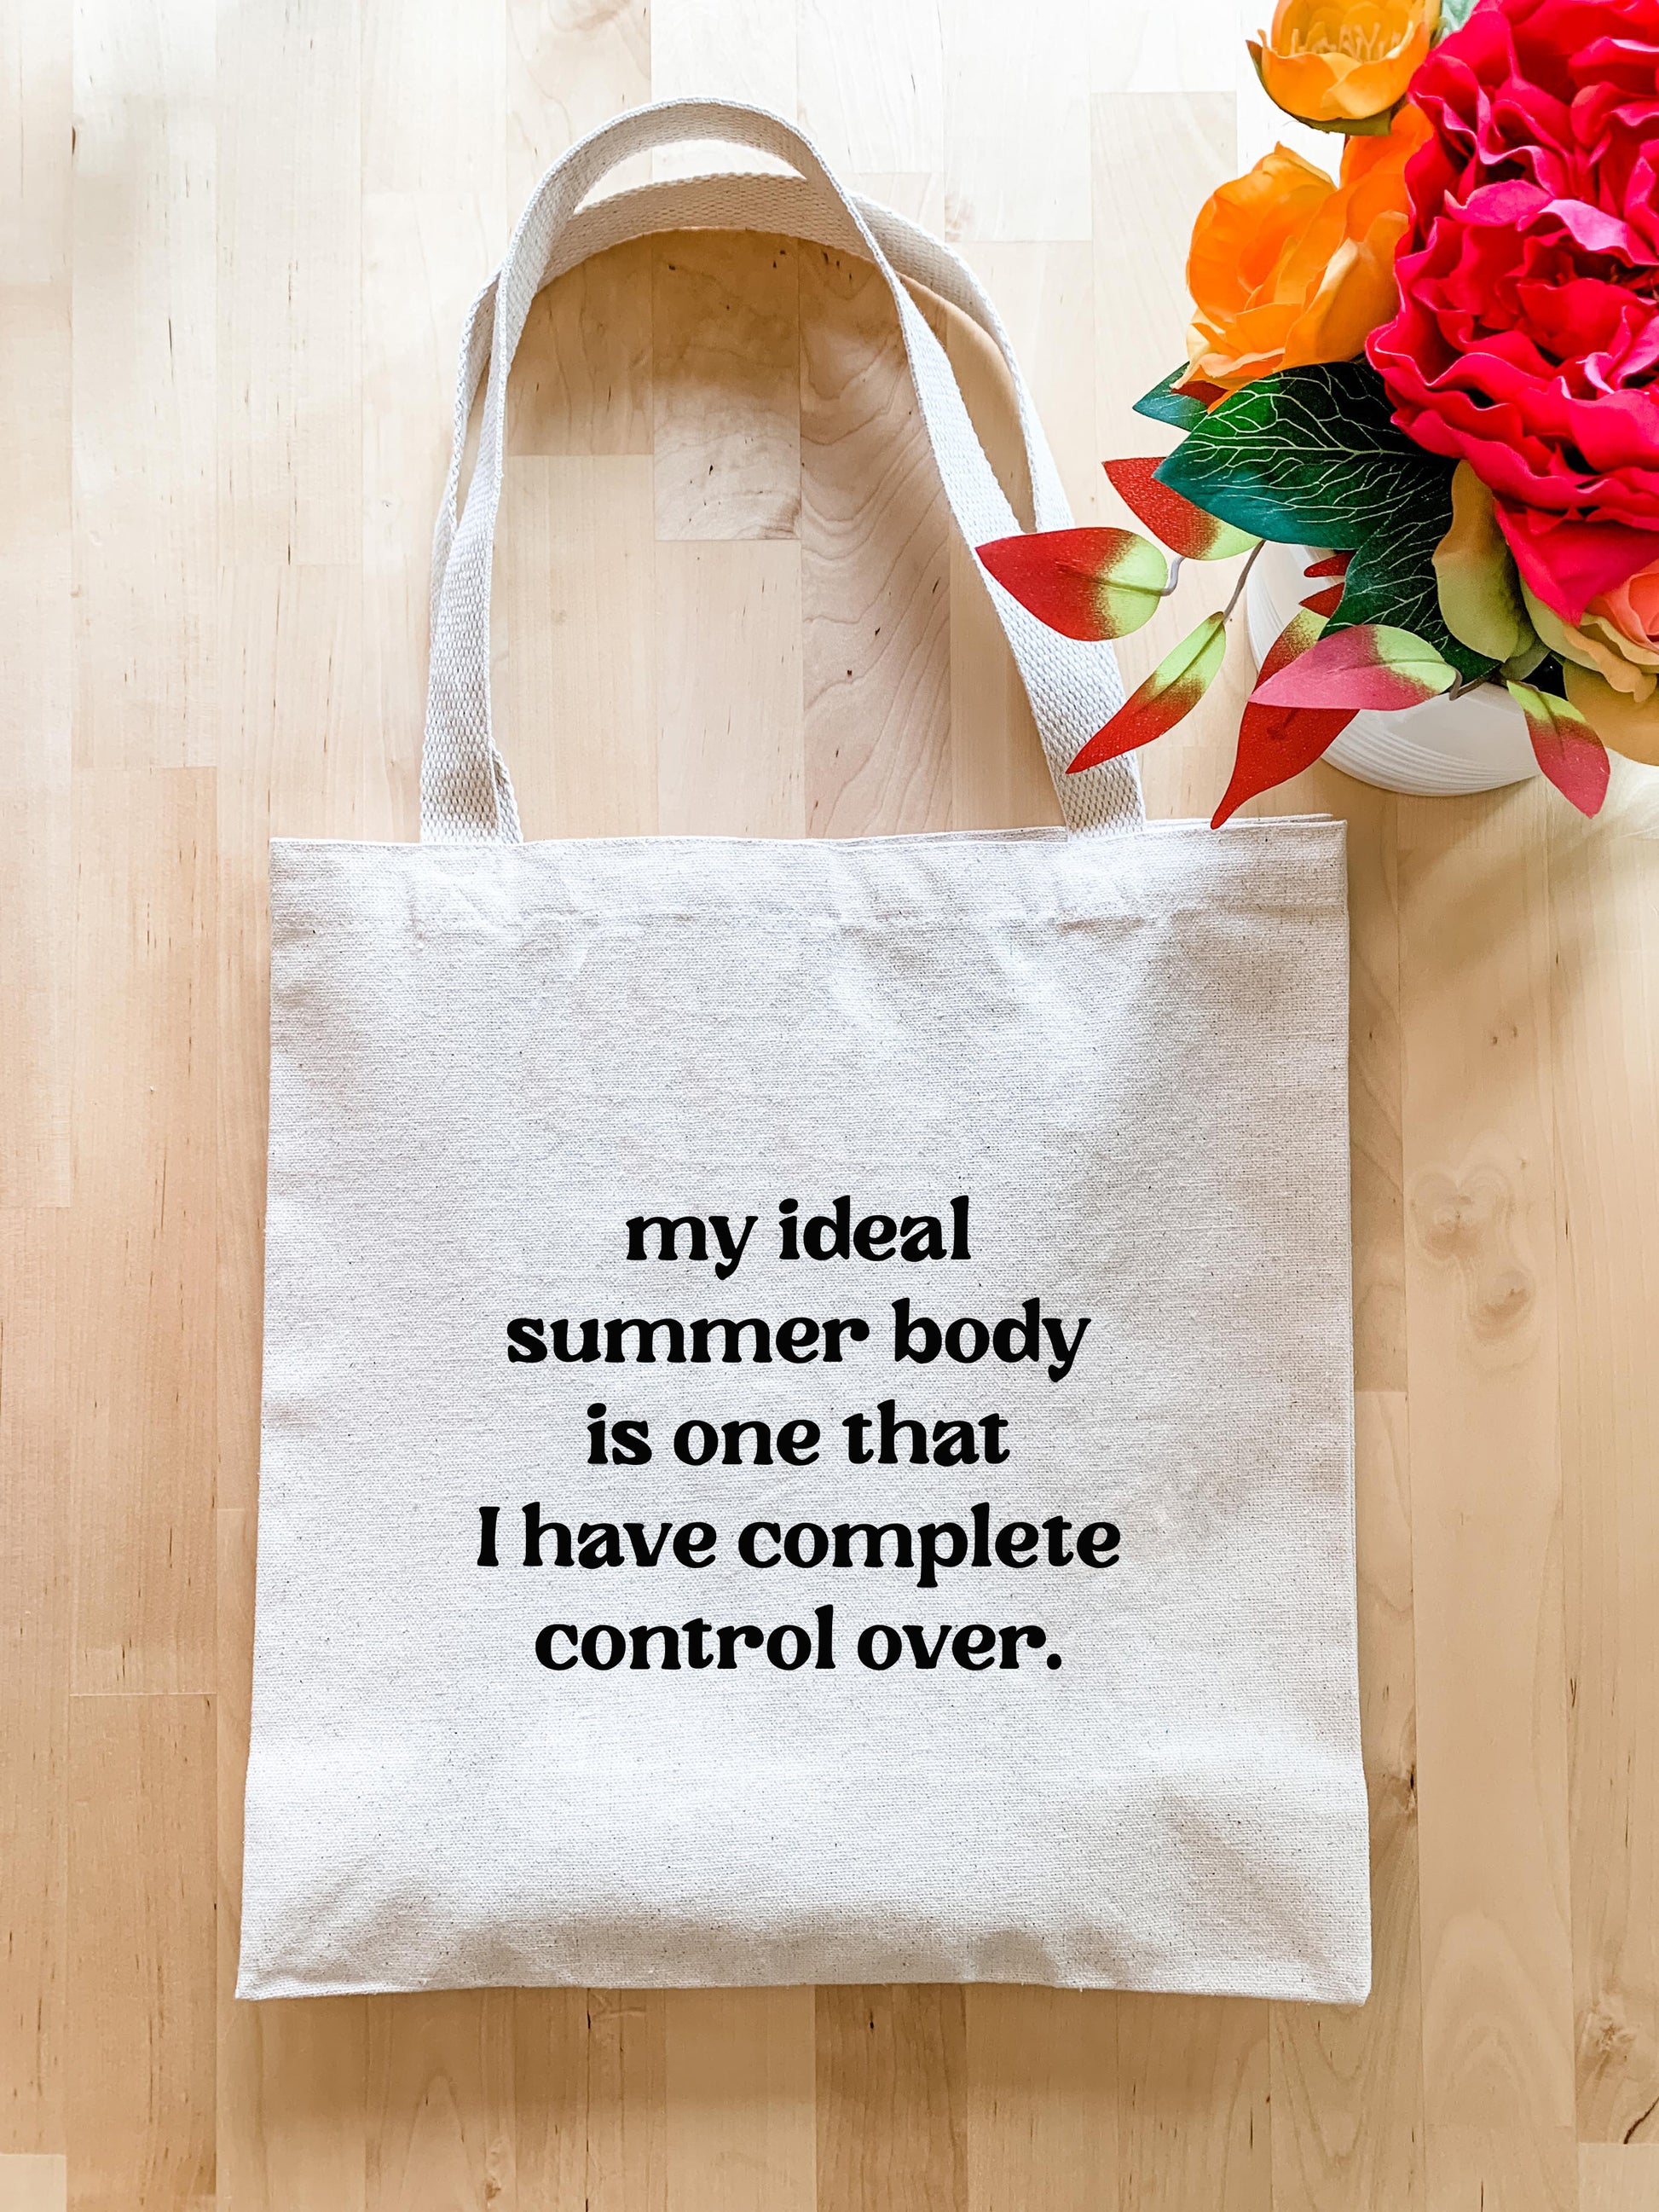 My Ideal Summer Body Is One I Have Complete Control Over - Tote Bag - MoonlightMakers